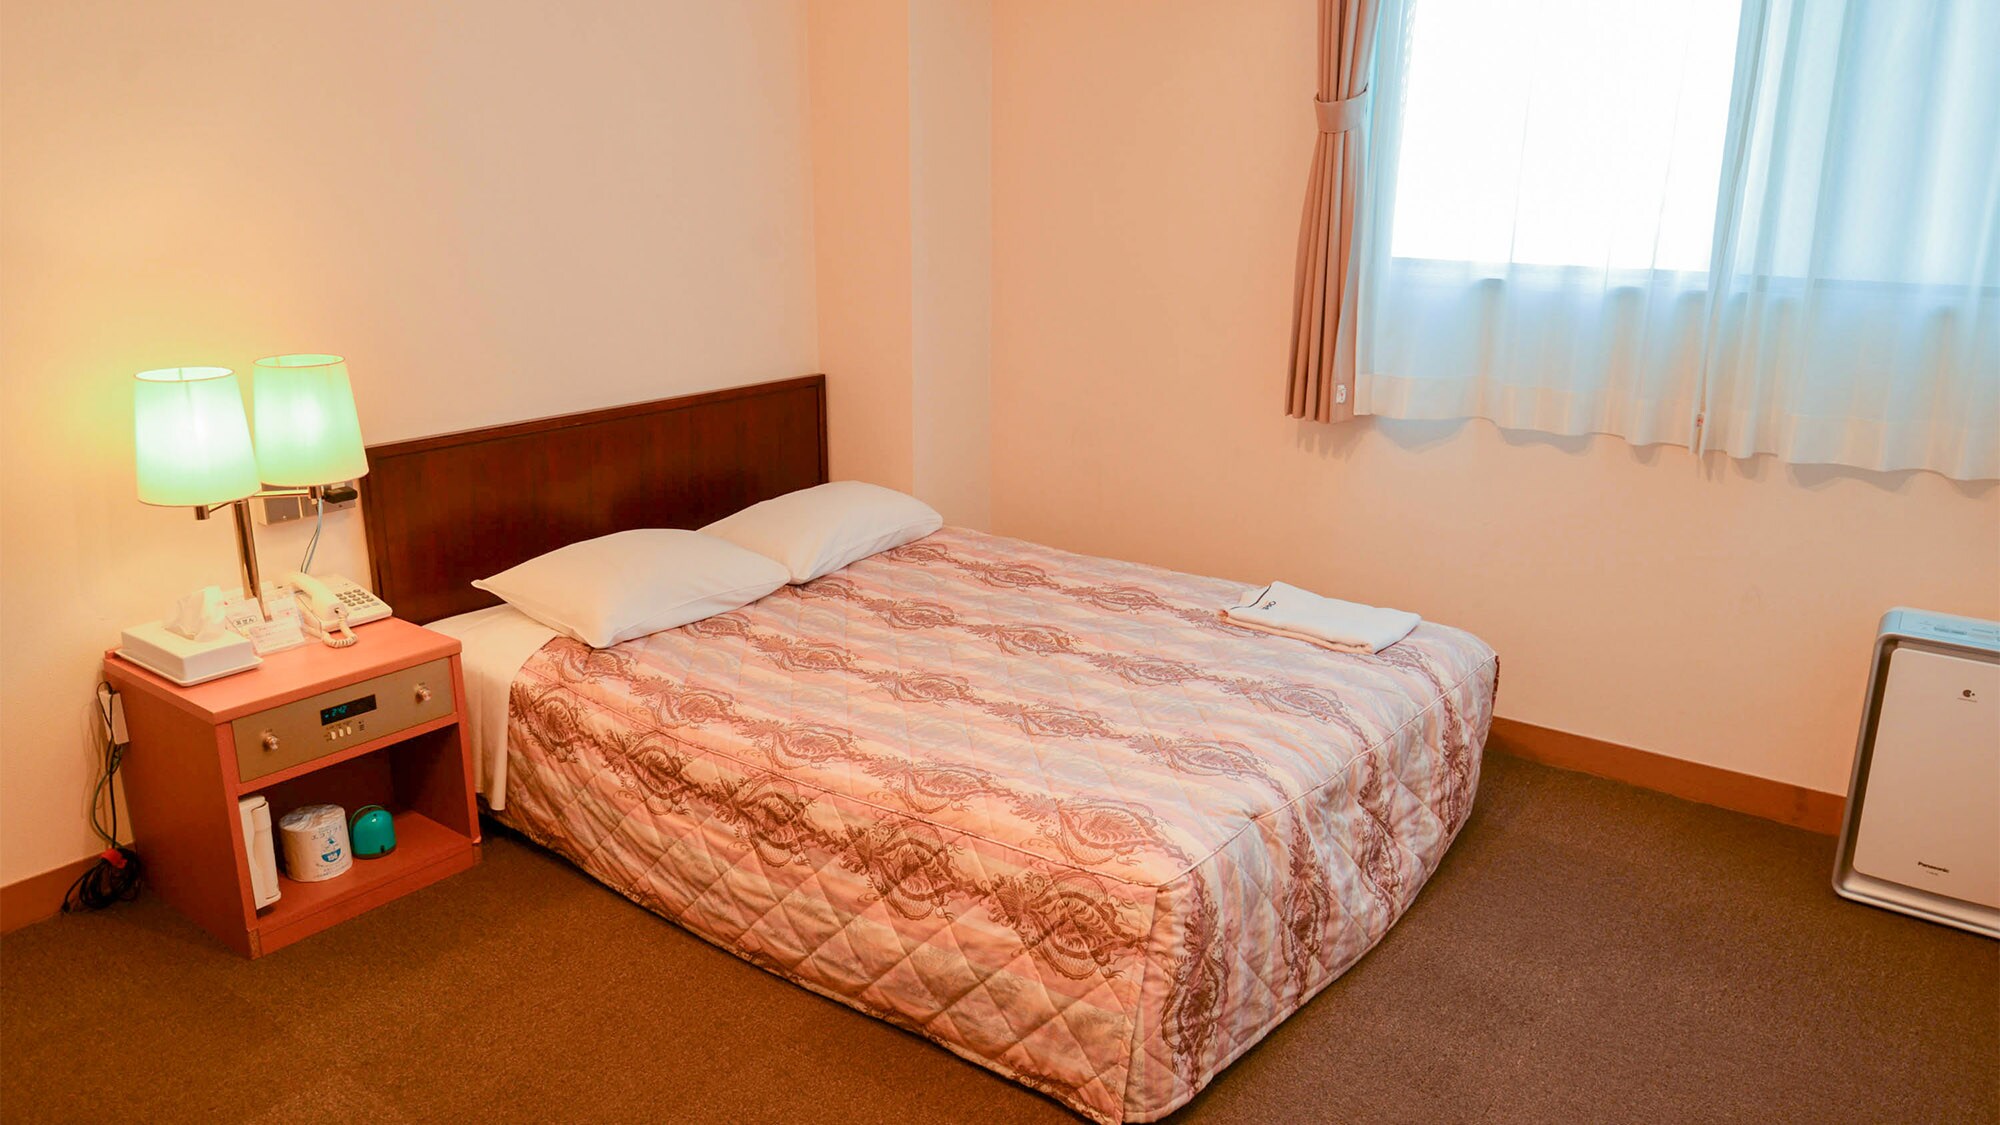 ・ Double room (main building)